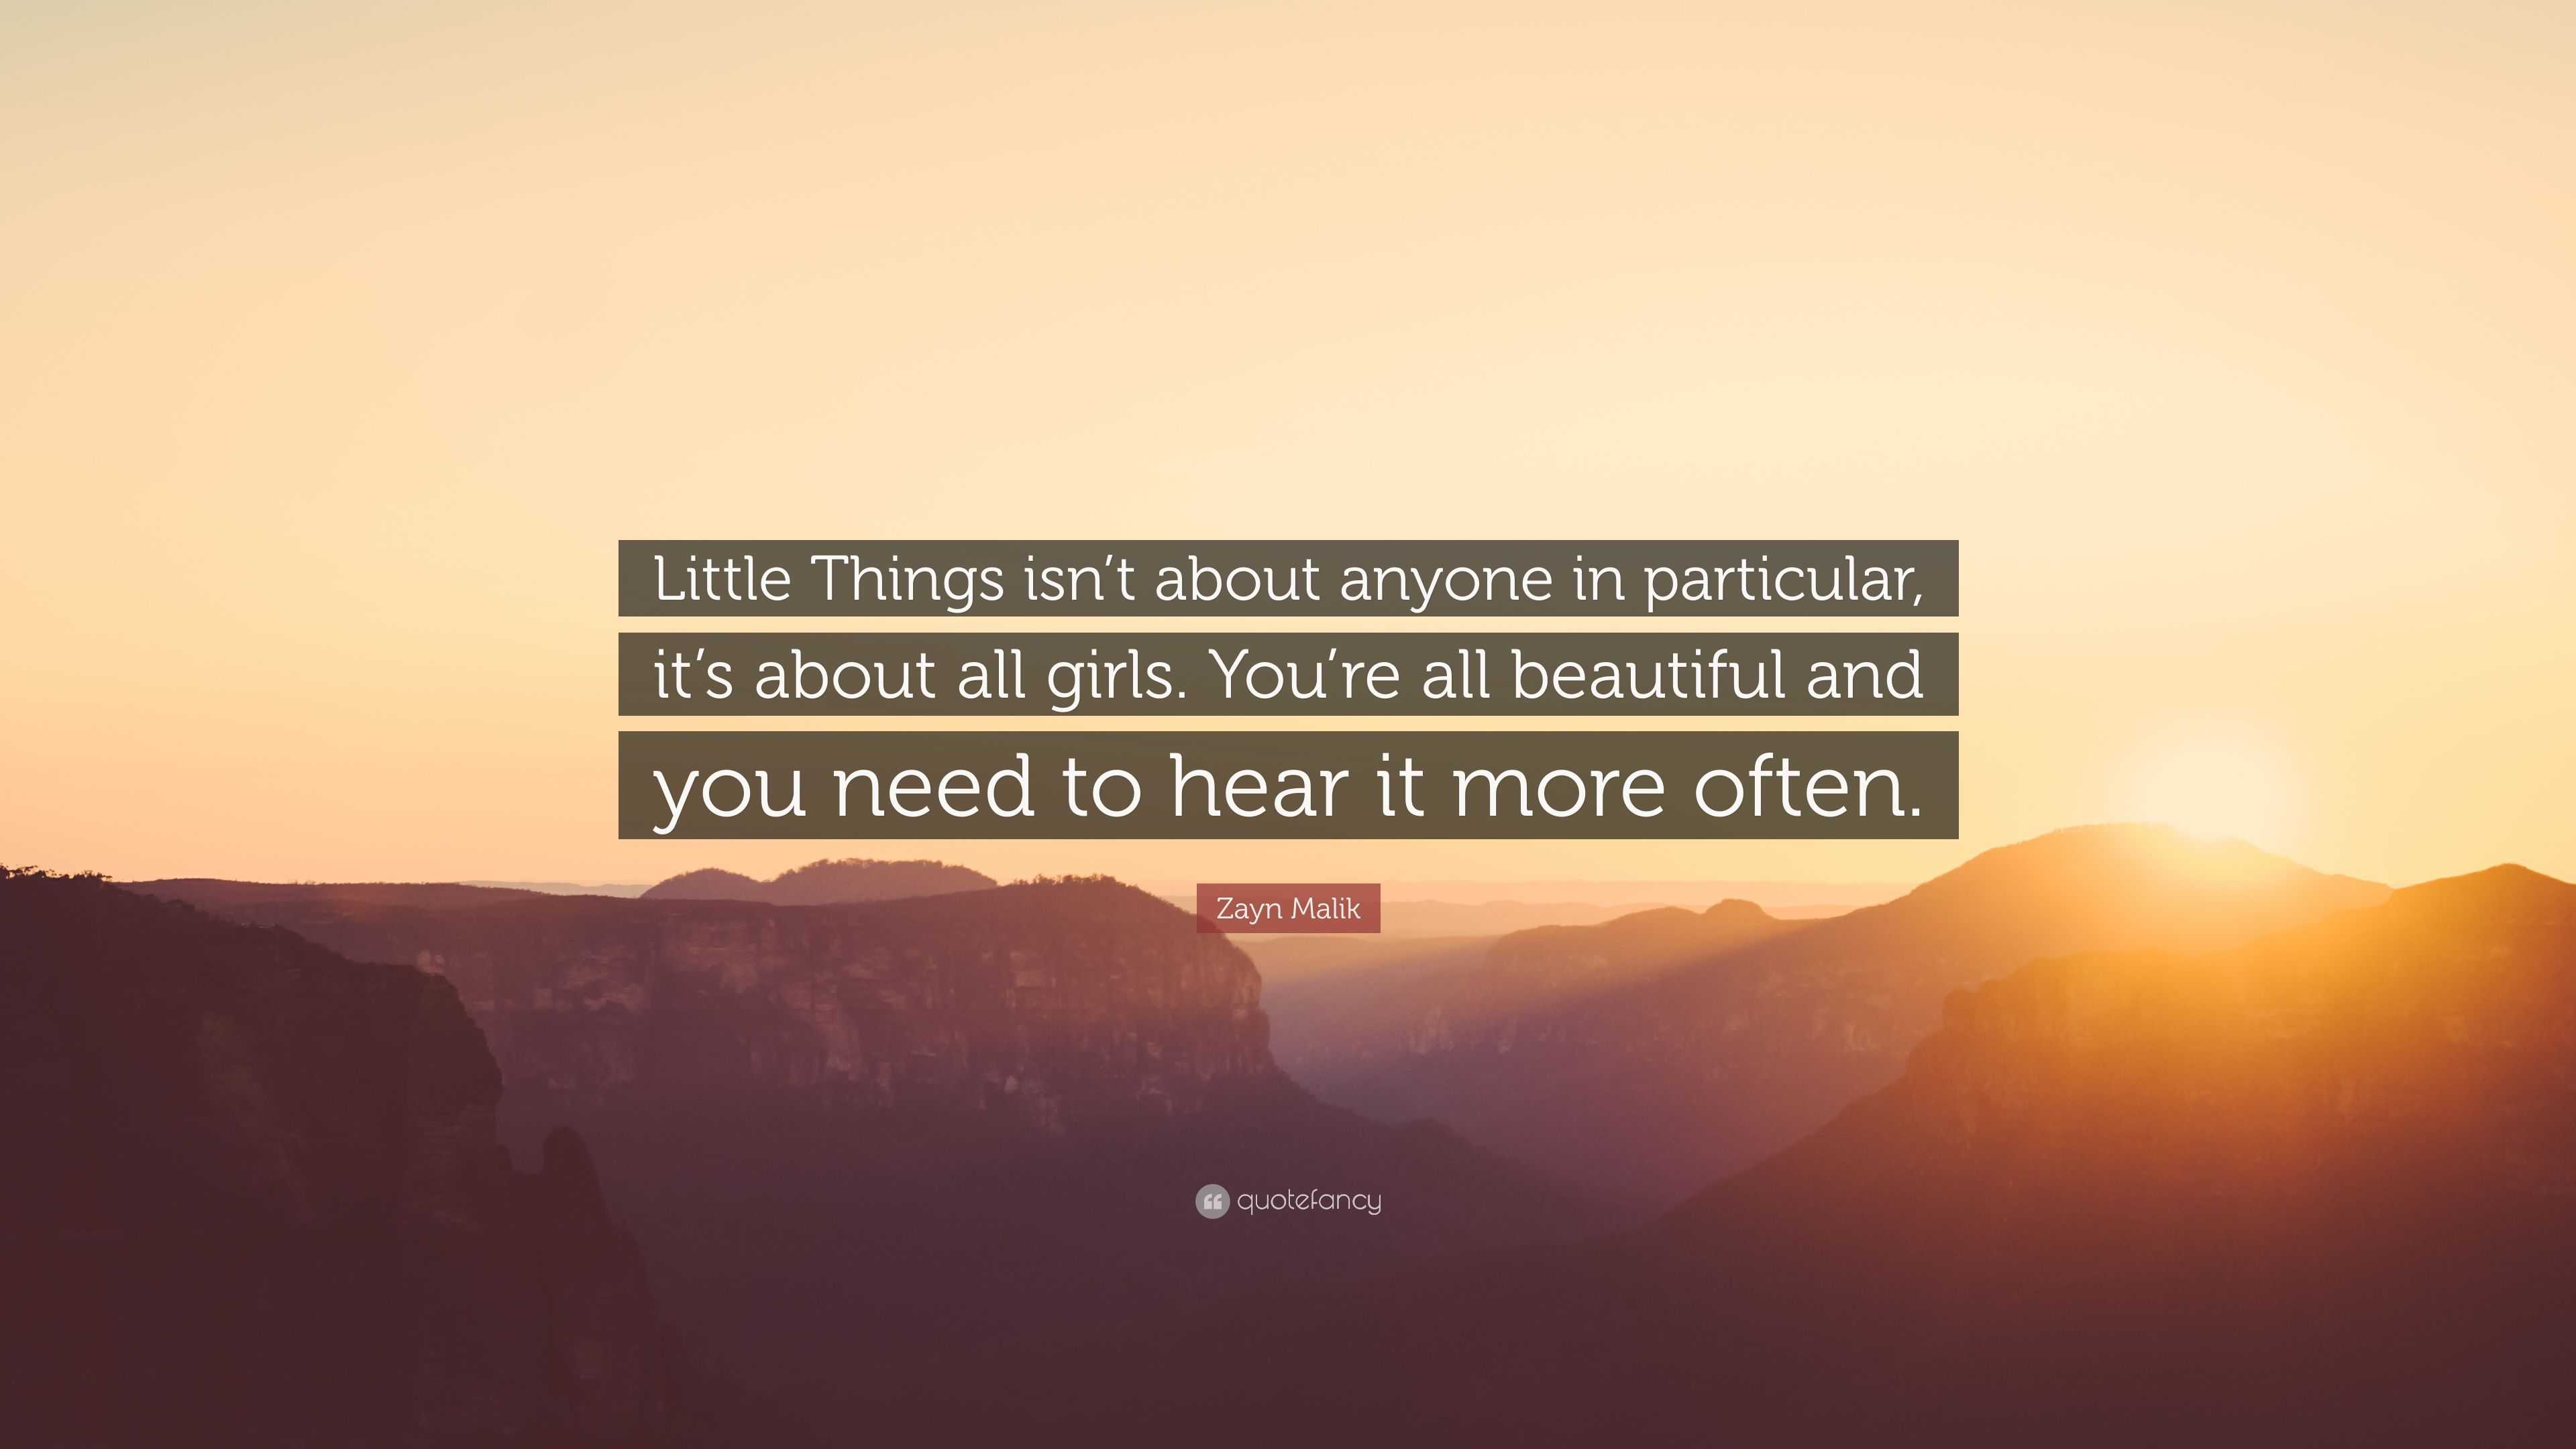 Zayn Malik Quote “little Things Isnt About Anyone In Particular Its About All Girls Youre 